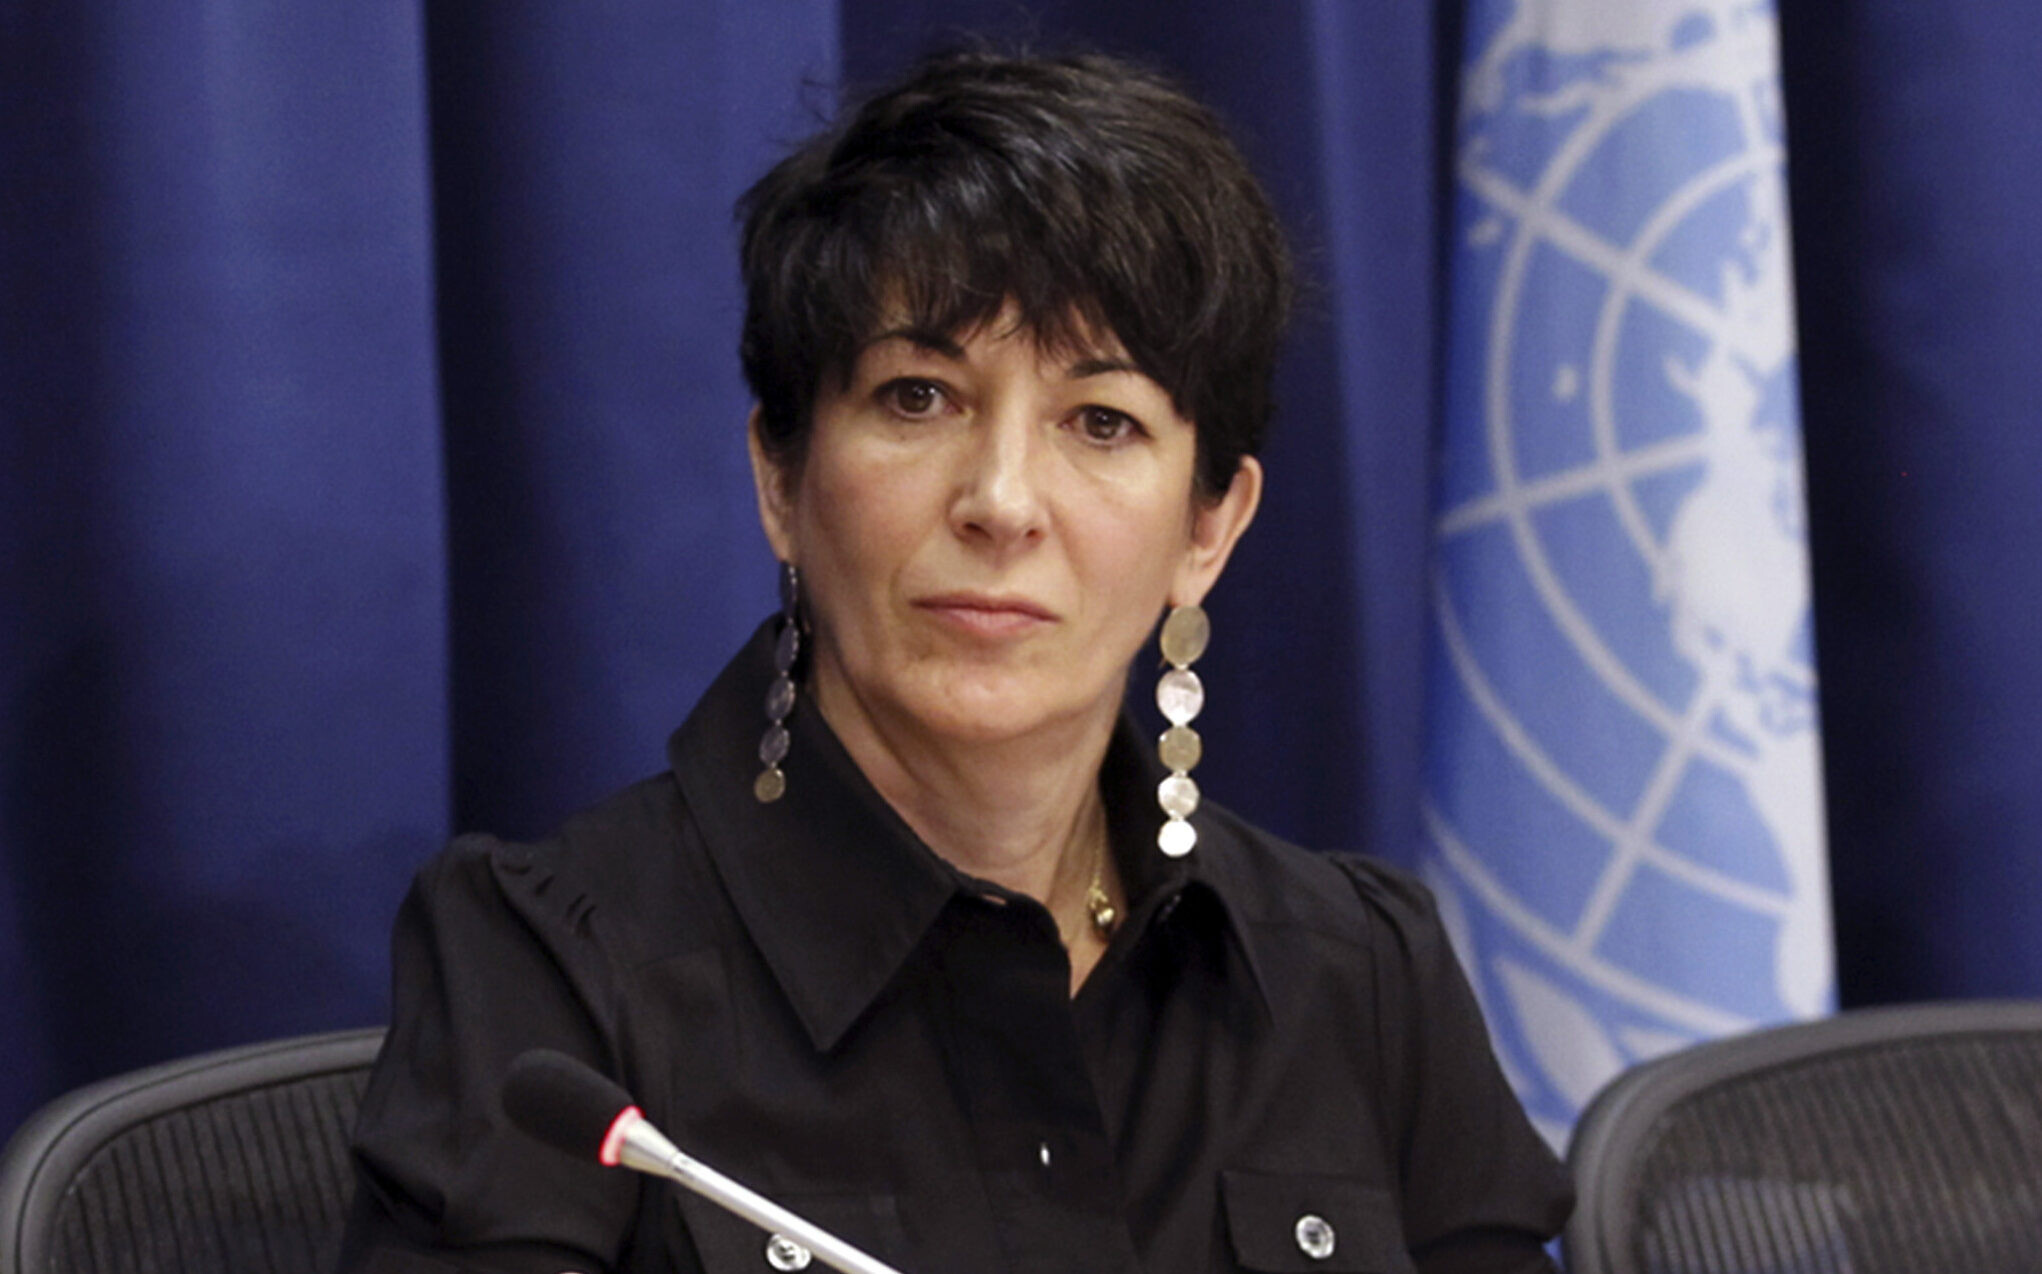 Ghislaine Maxwell Convicted on Five of Six Counts in Epstein Sex Abuse Case